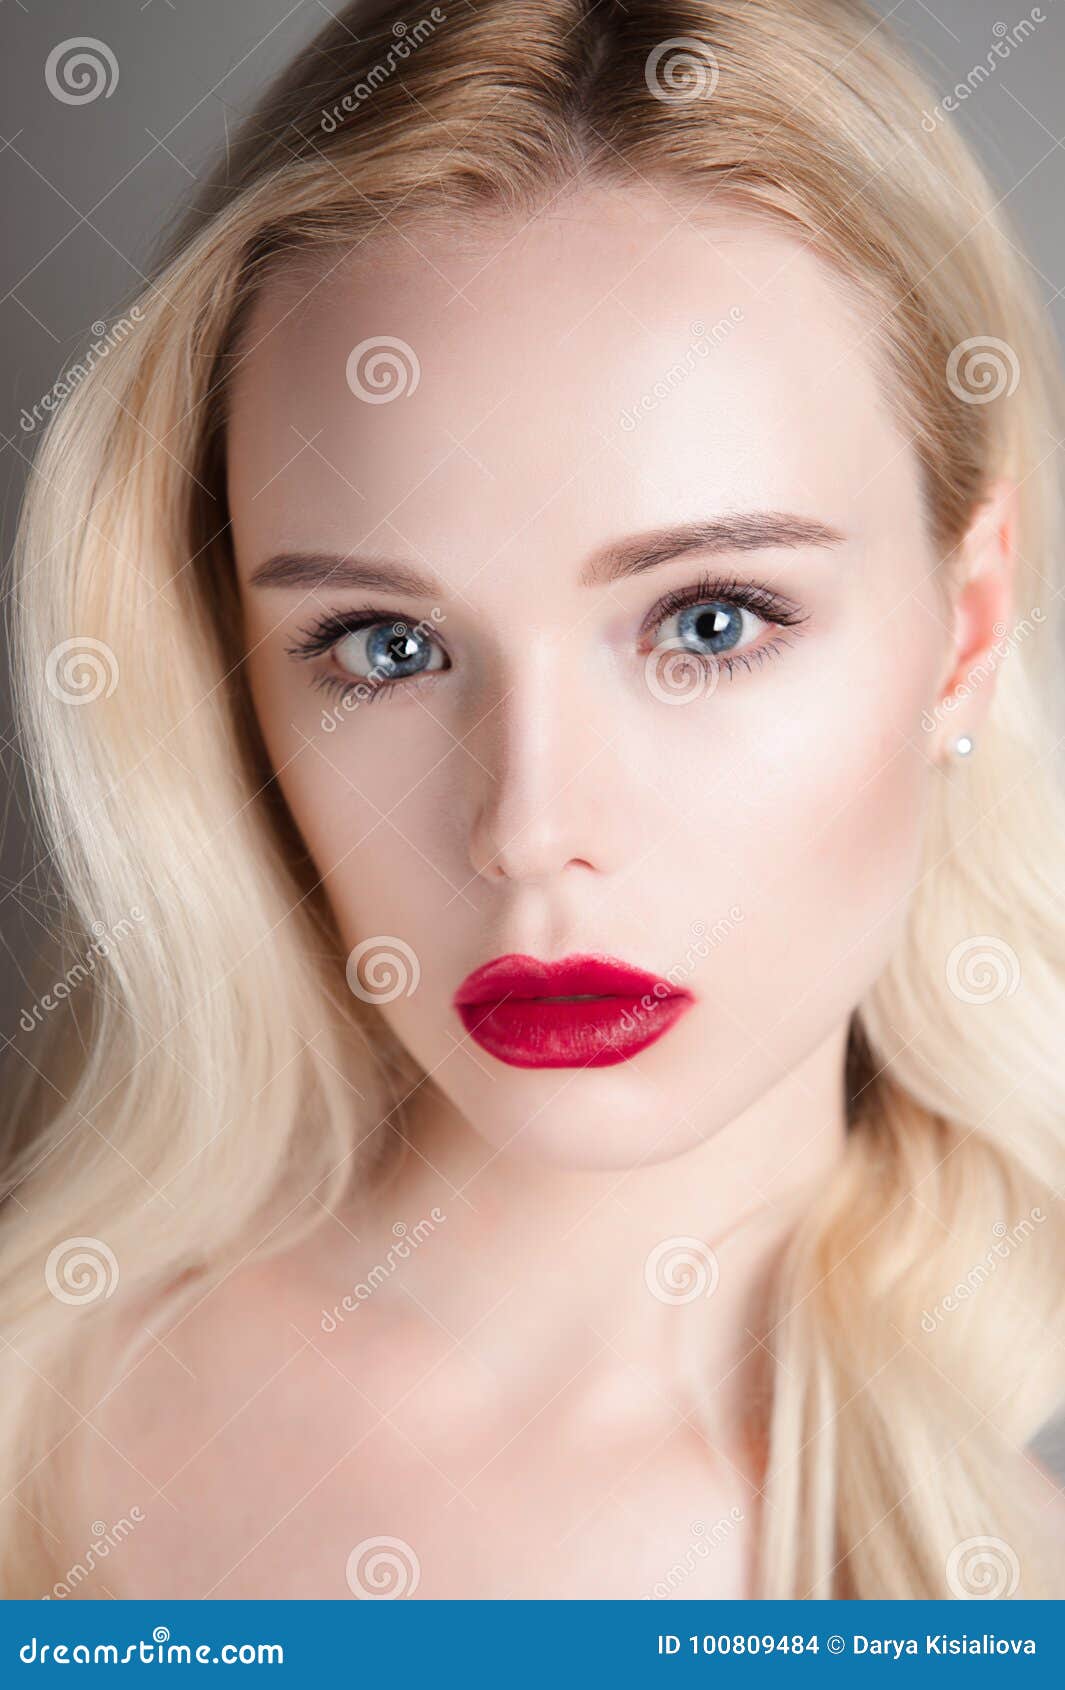 Beauty Model Girl with Perfect Make-up Red Lips and Blue Eyes Looking ...